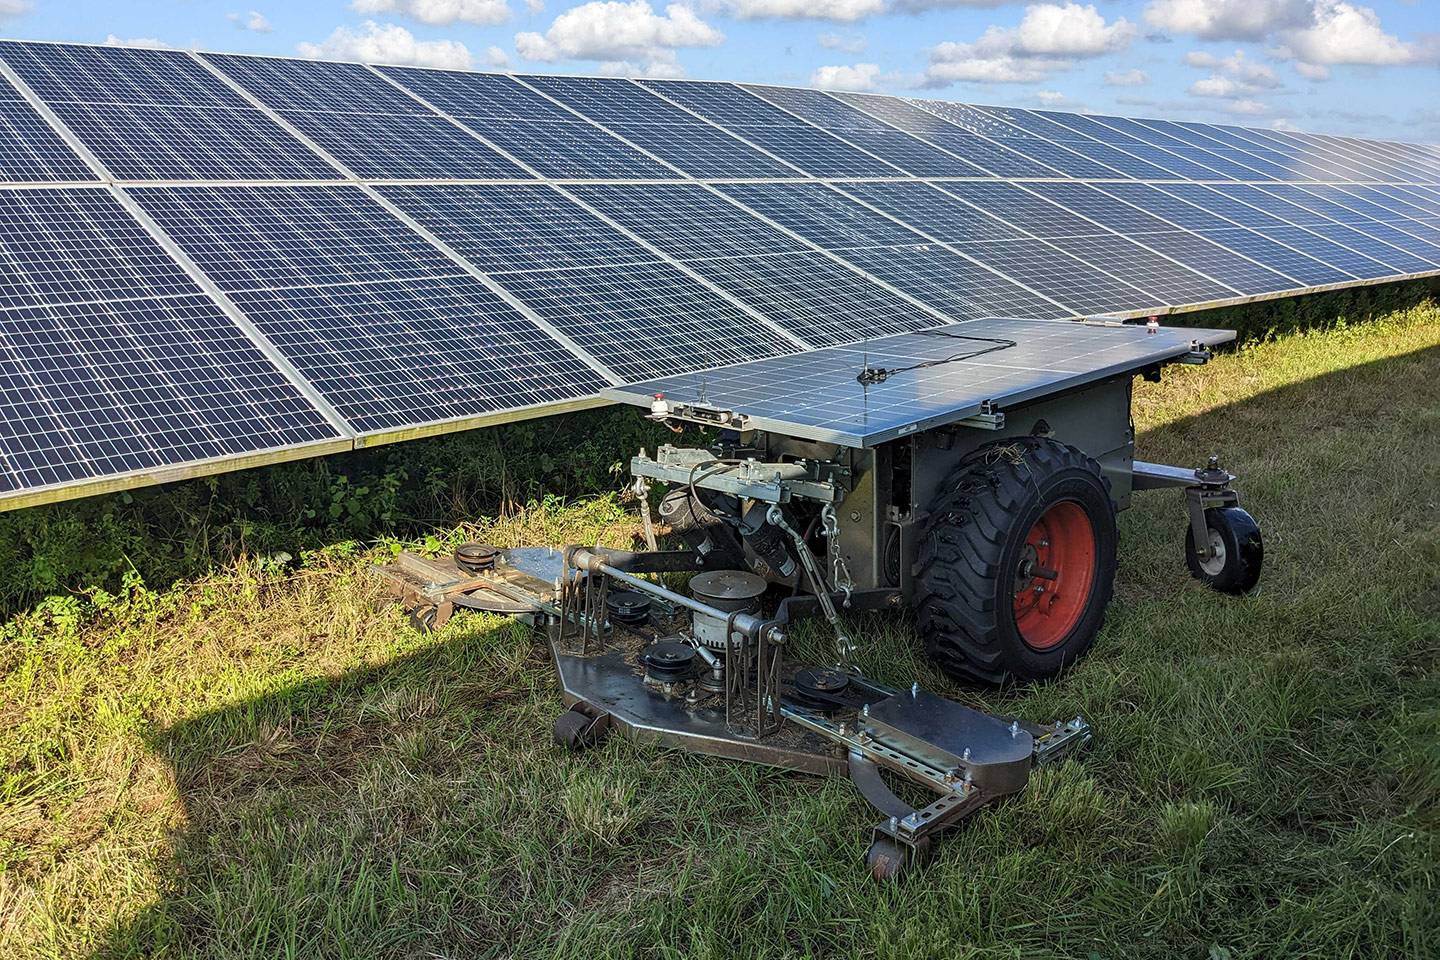 Robotic automation for smart agriculture and renewable energy